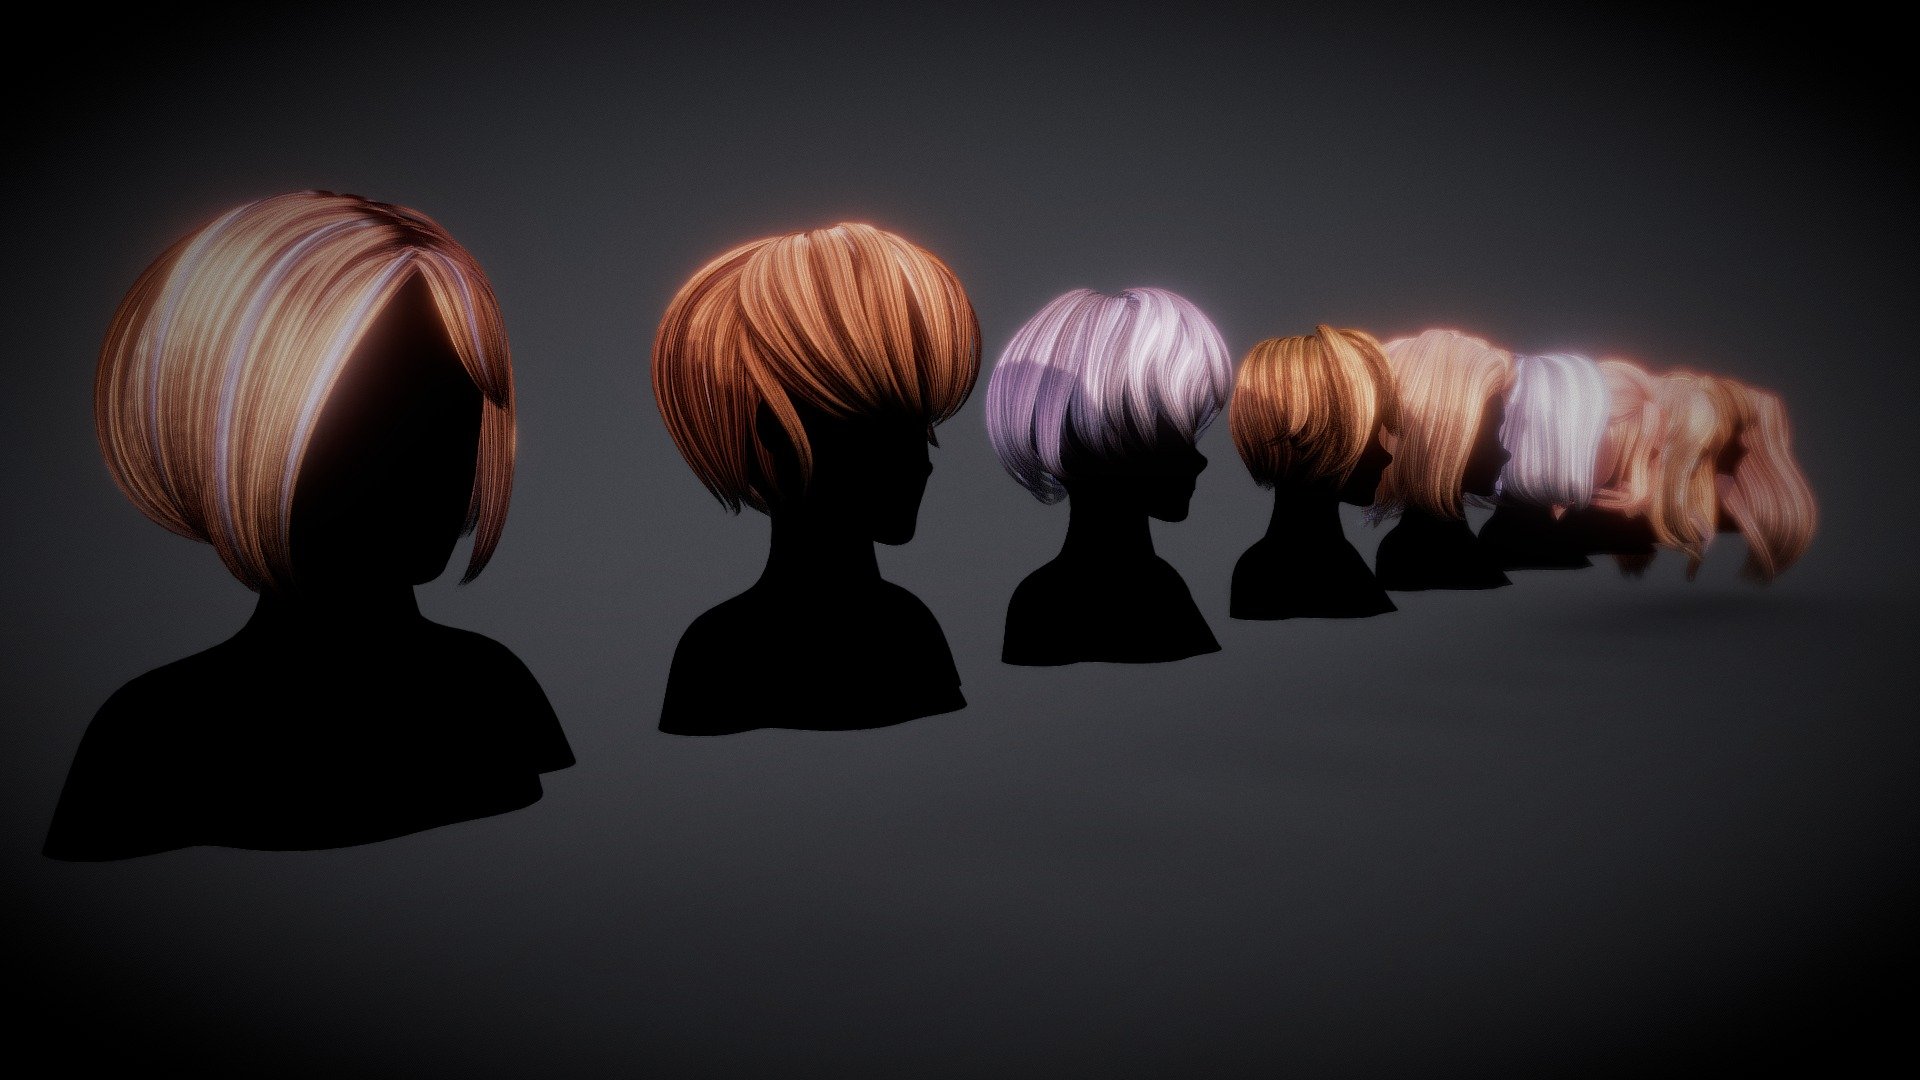 Templates created in blender3D version 3.0

Contains 10 different hair models for characters

Formats: FBX, Obj and Blend

www.artstation.com/artwork/nYV1JK

www.instagram.com/scrawl_h/



 - Hair pack 10 models - Buy Royalty Free 3D model by H.art 3d model